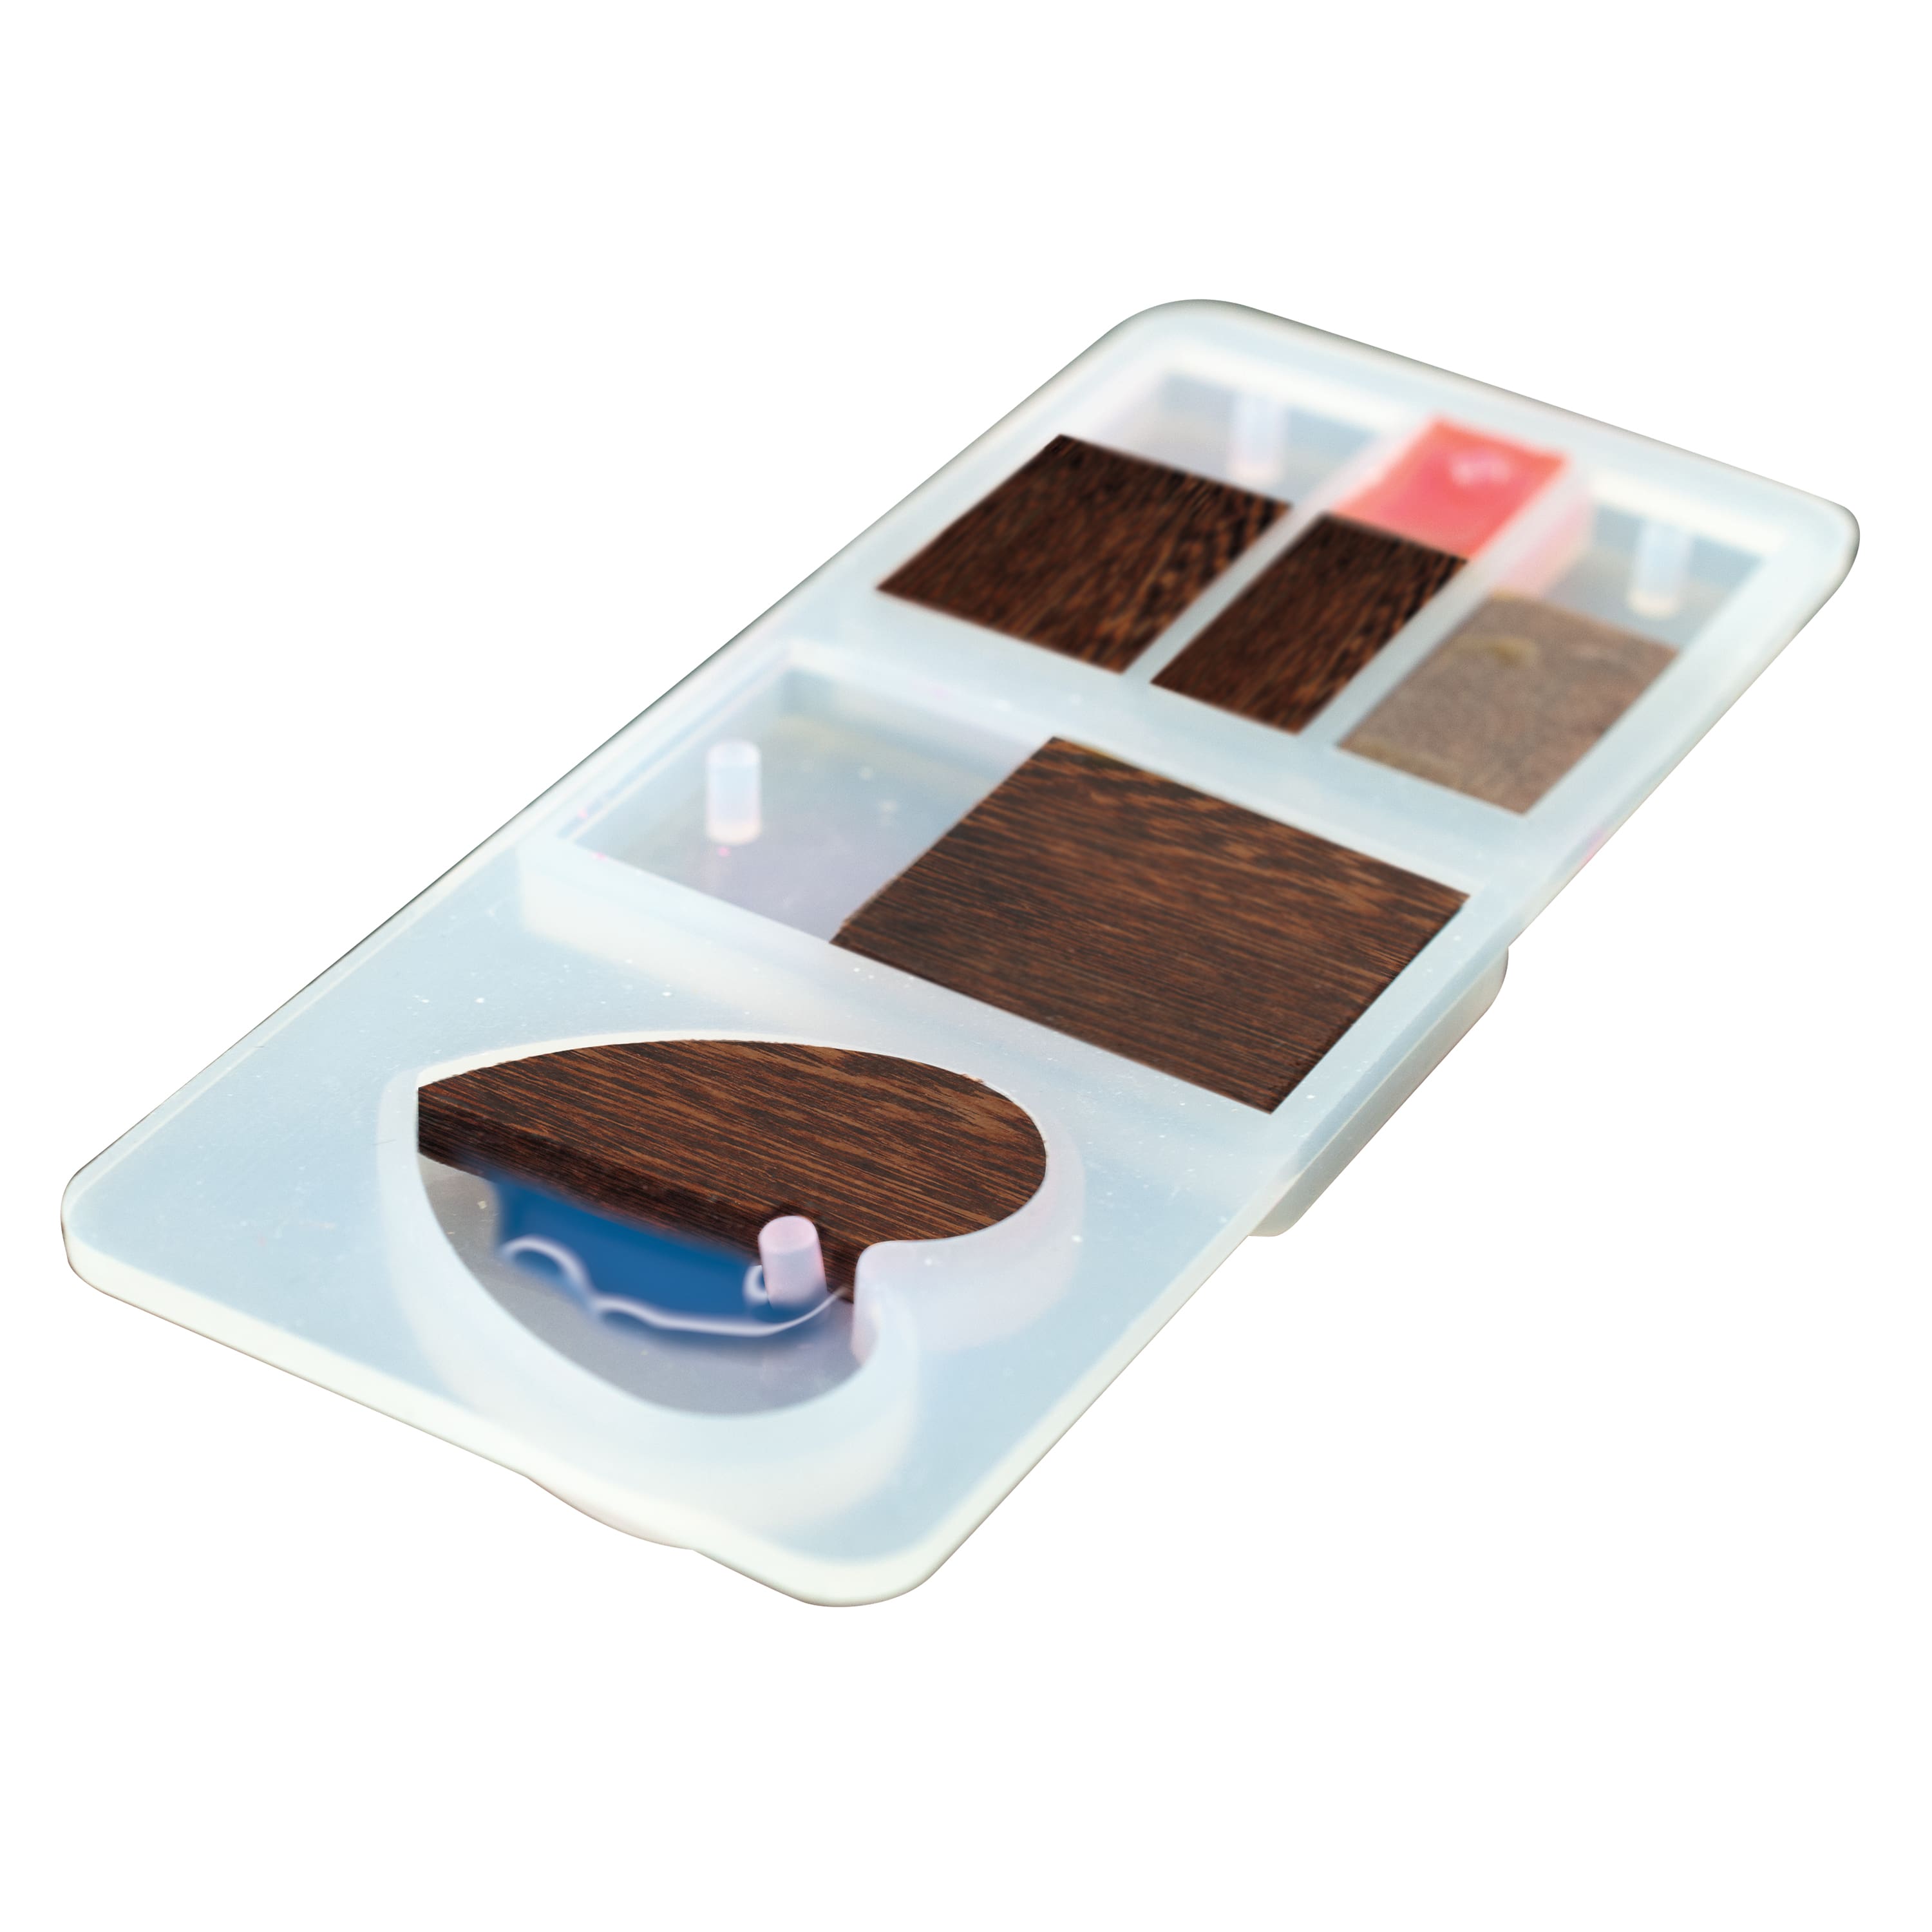 Wood &#x26; Resin Jewelry Kit by Craft Smart&#xAE;